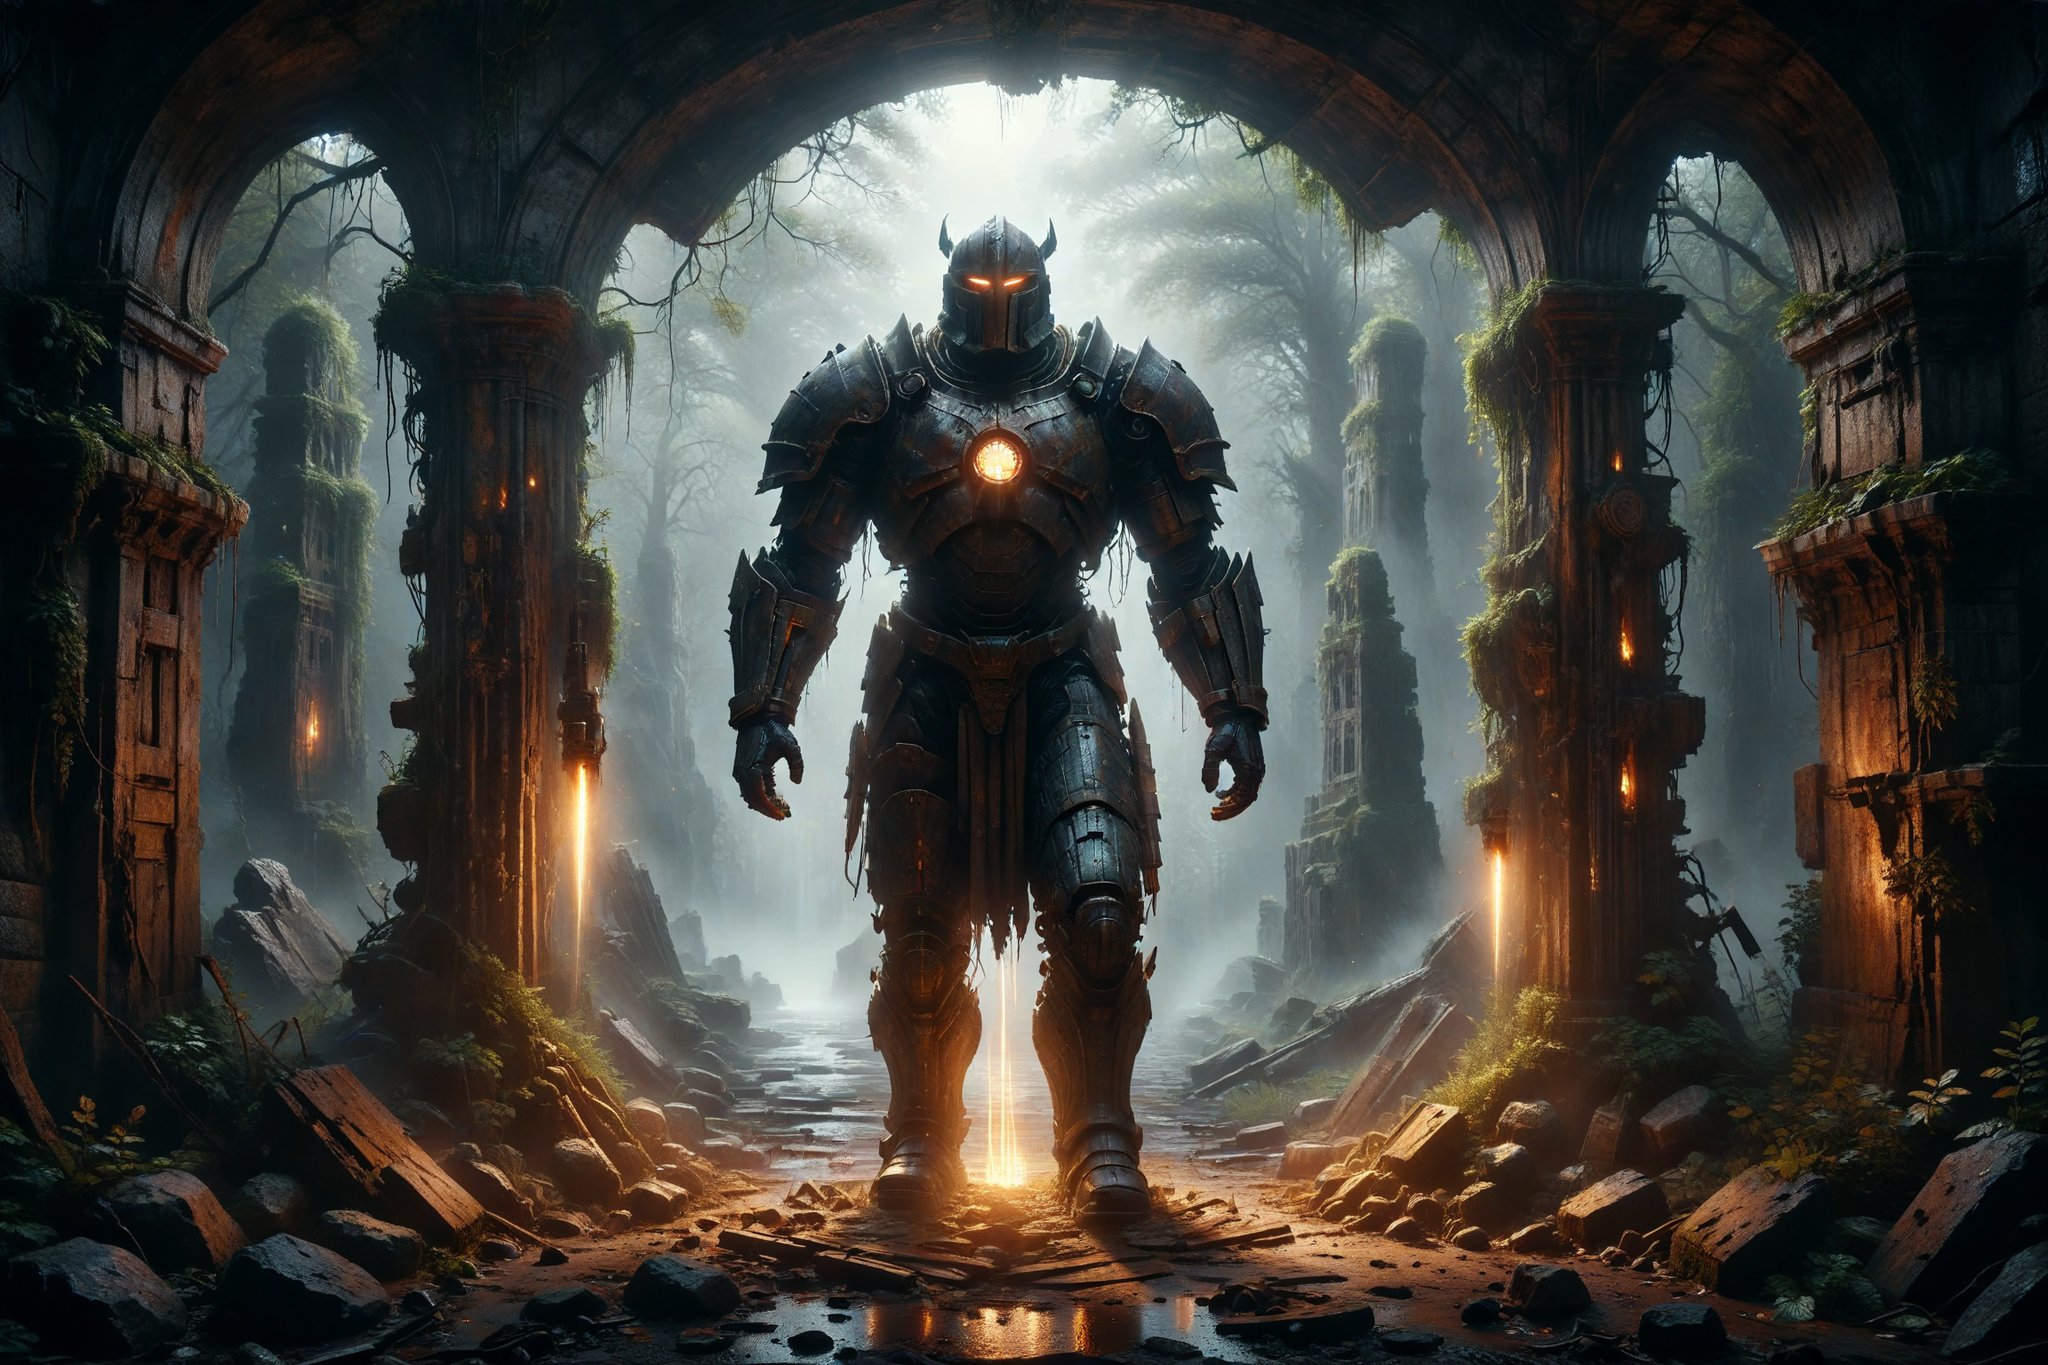 An imposing guardian in rusted iron armor, guarding the entrance to a quivering portal where flashes of light reveal passages to unknown dimensions.